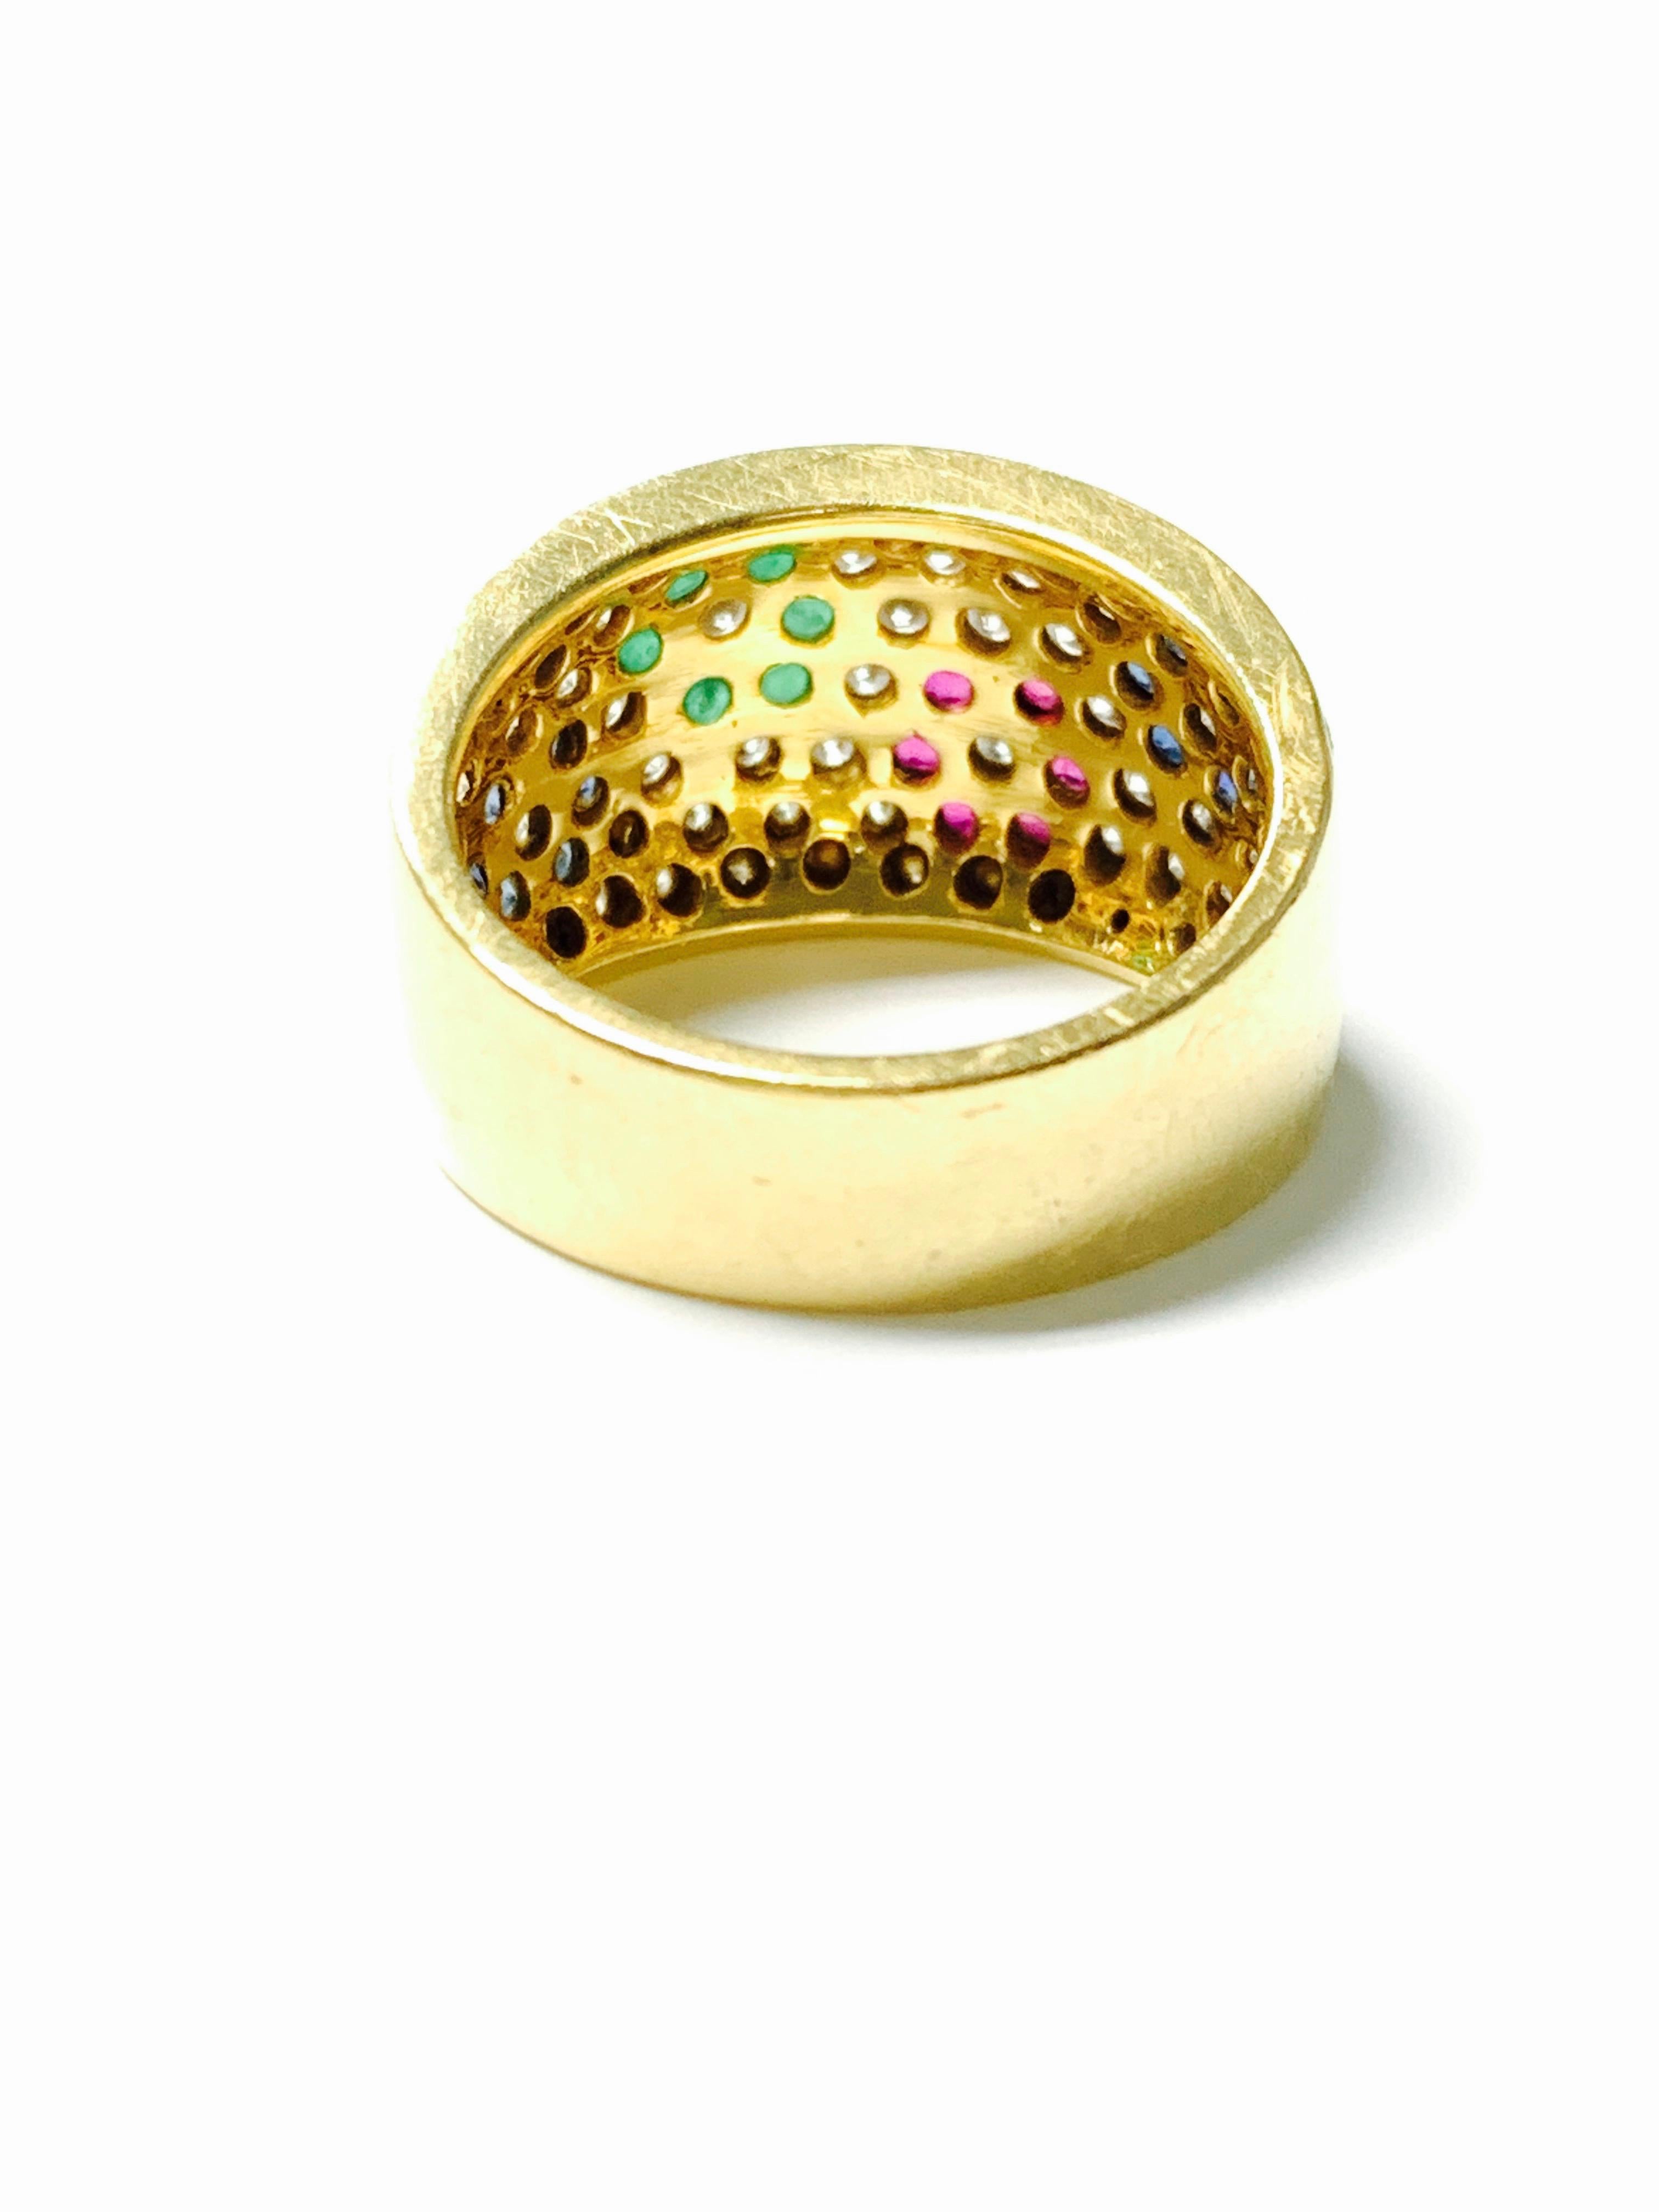 Contemporary Diamond, Ruby, Emerald and Blue Sapphire Ring in 18 K Gold